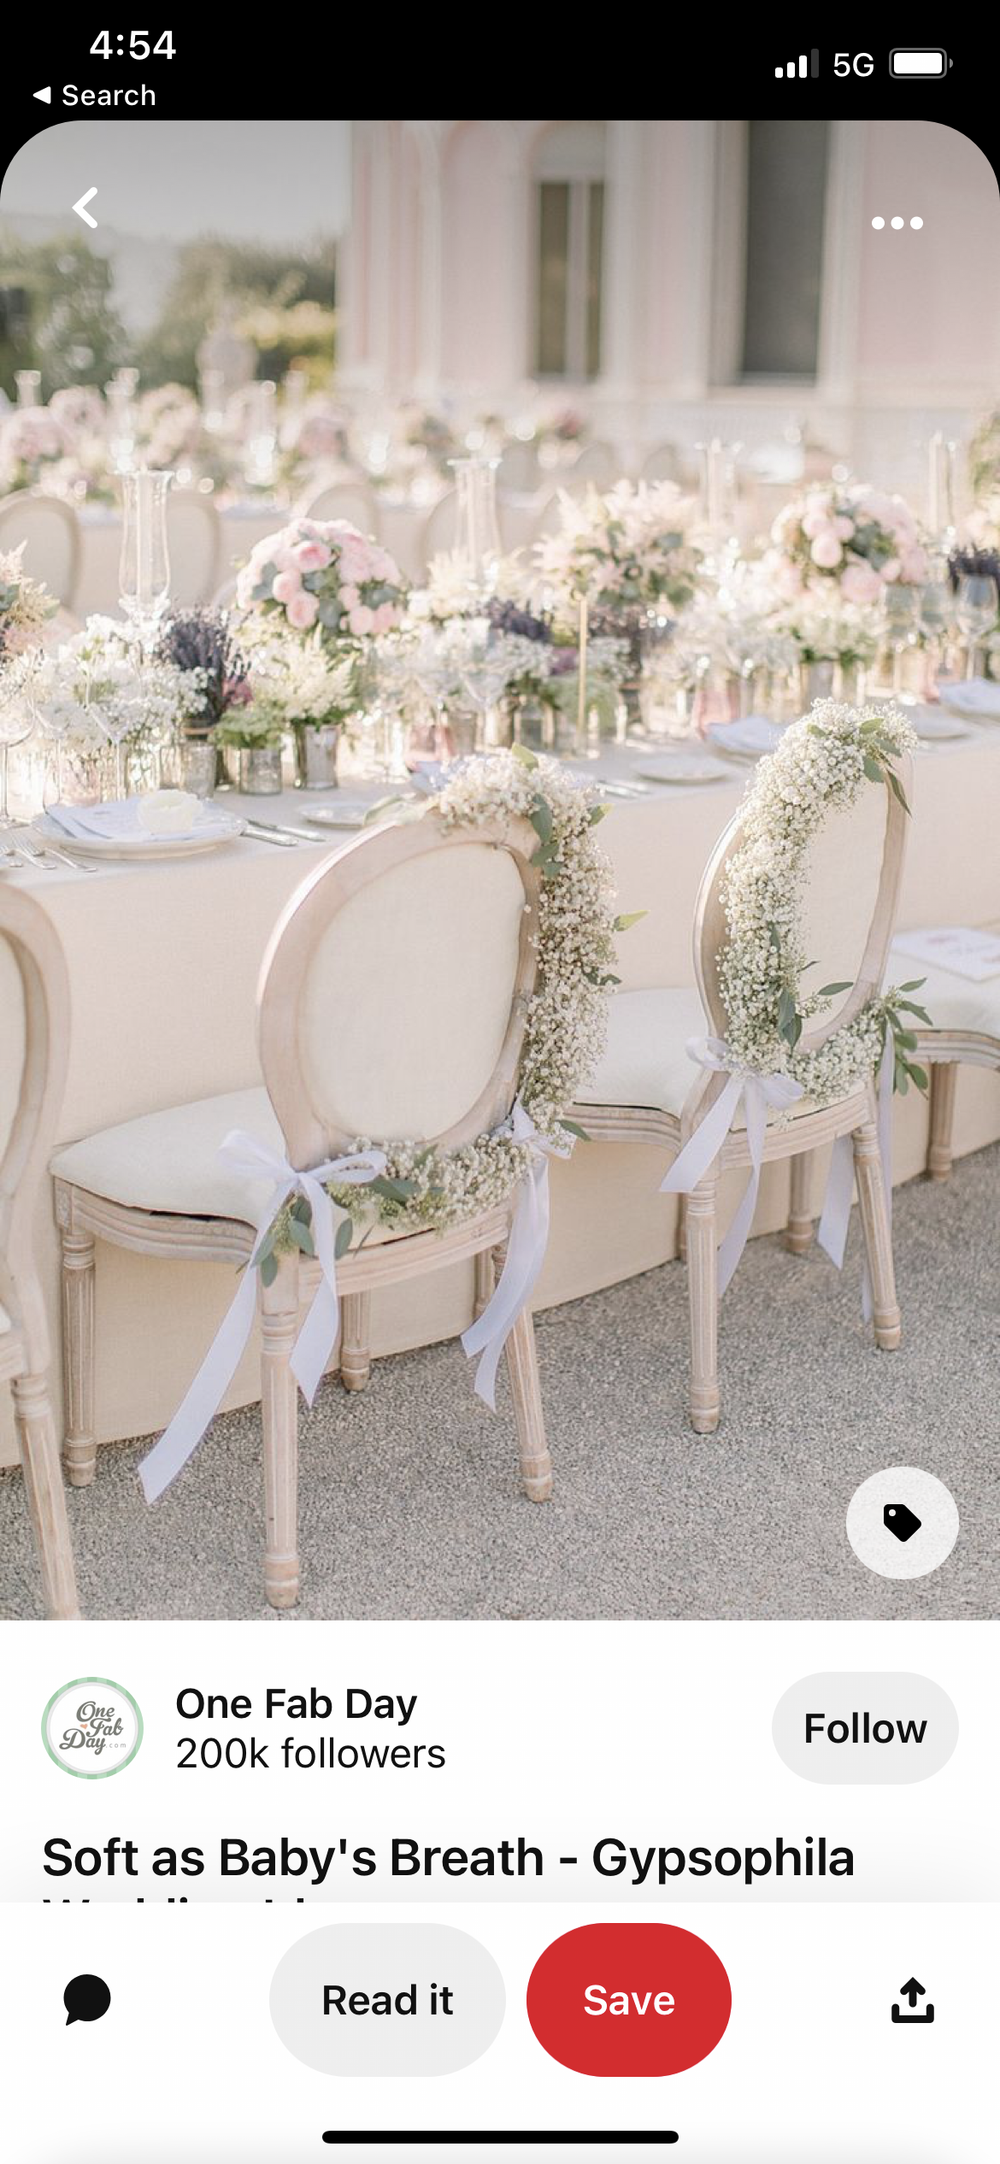 THREE: Baby's Breath on Cane Back Chairs